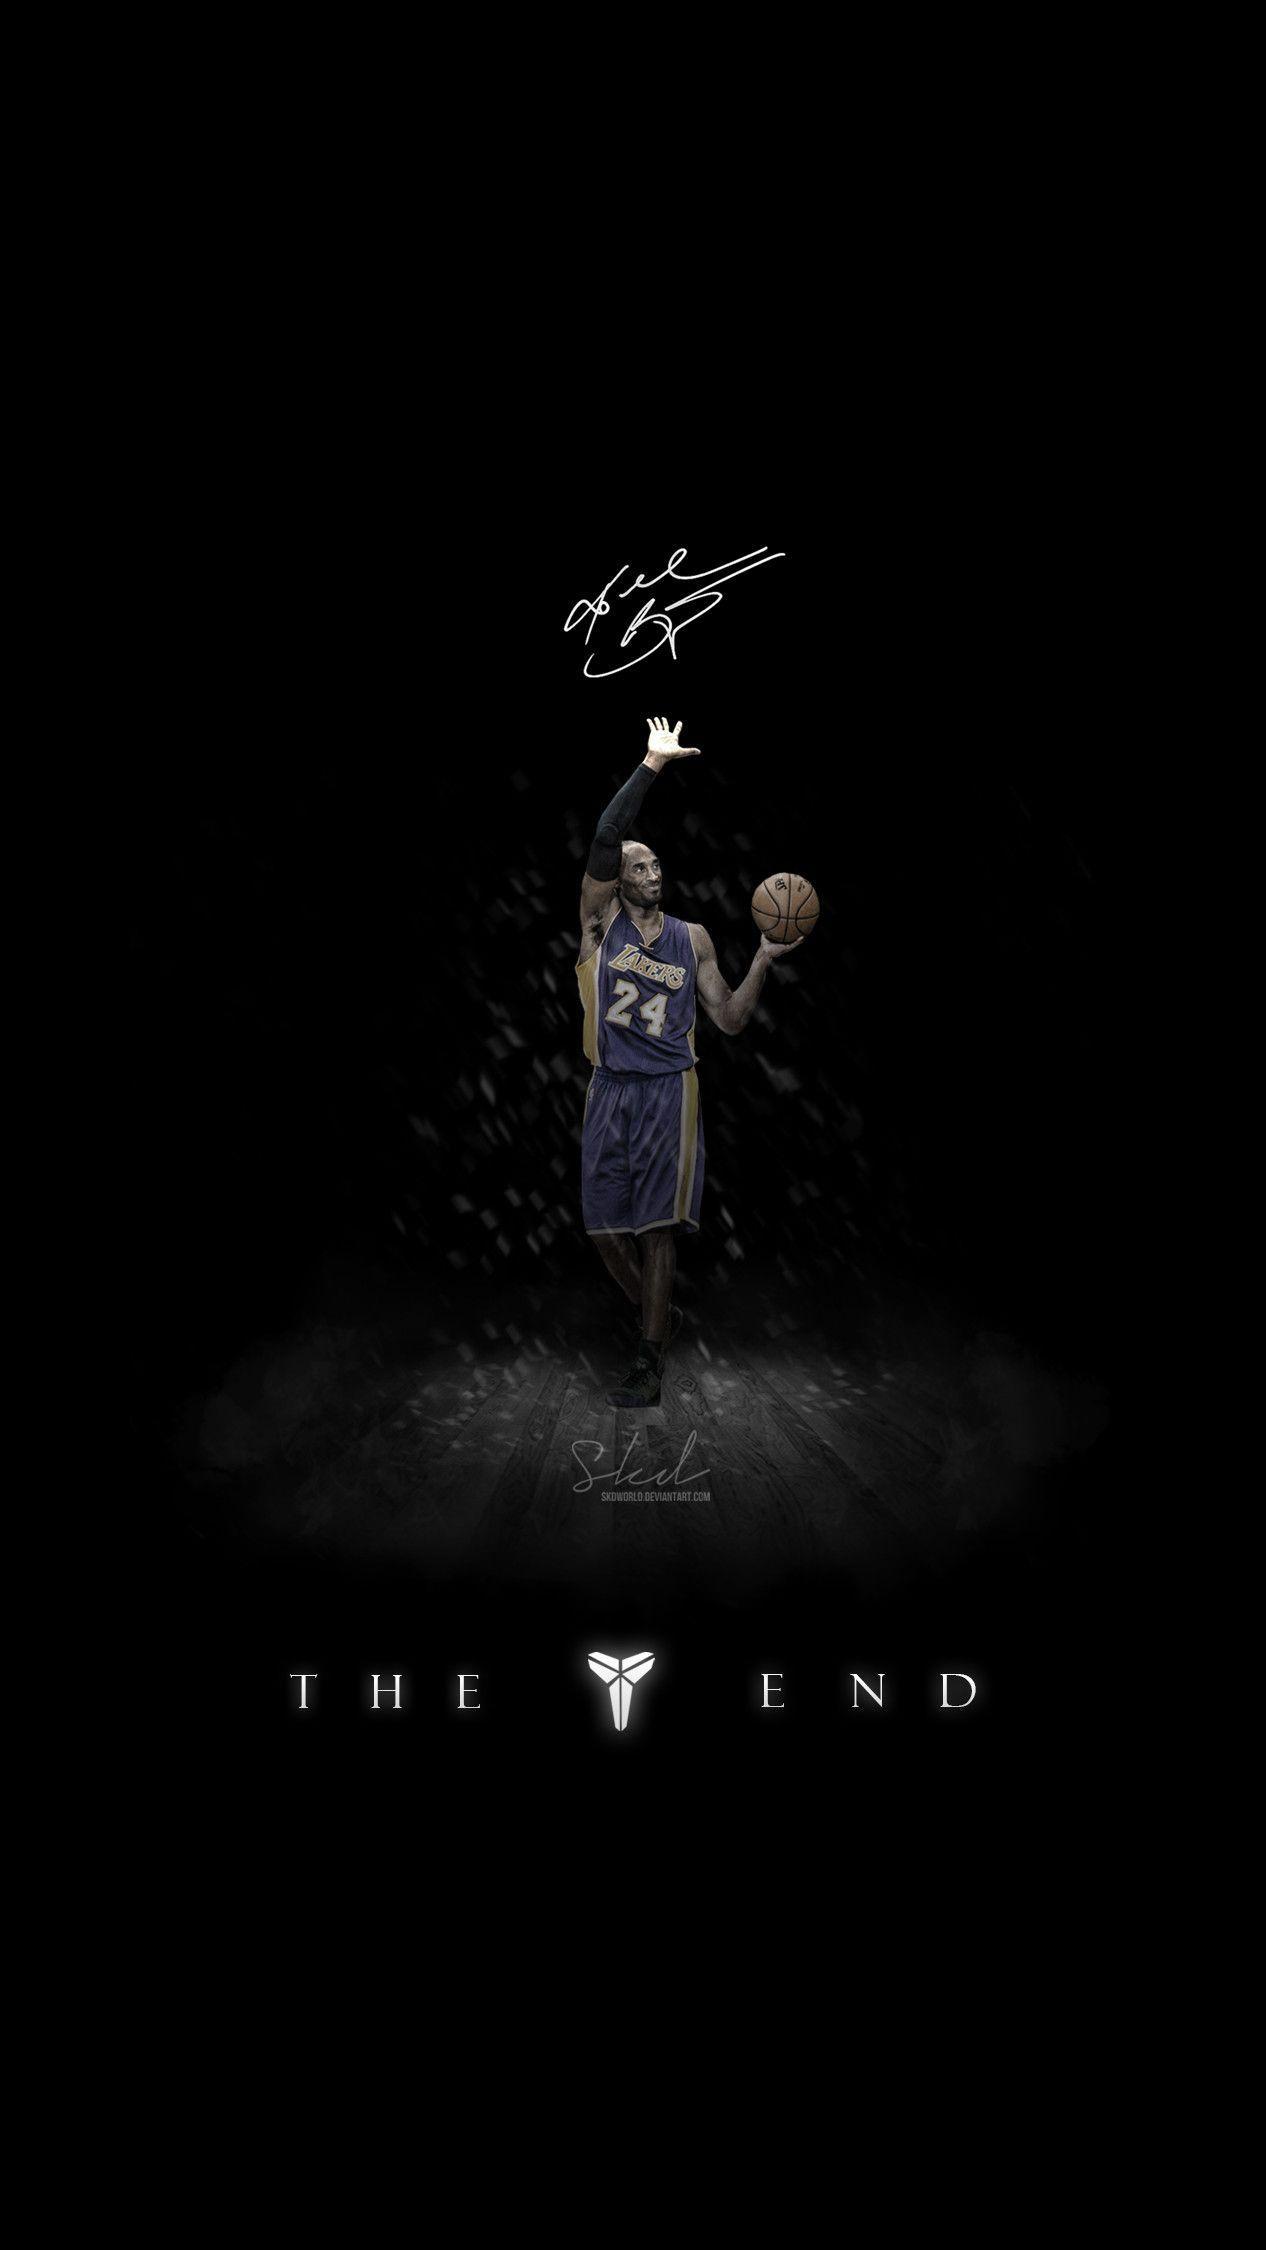 Kyle on Twitter Made a wallpaper iPhone X version of this last week and  its been my phone background ever since  MambaMentality x  WallpaperWednesday httpstcoA8N0ljSTDU  X